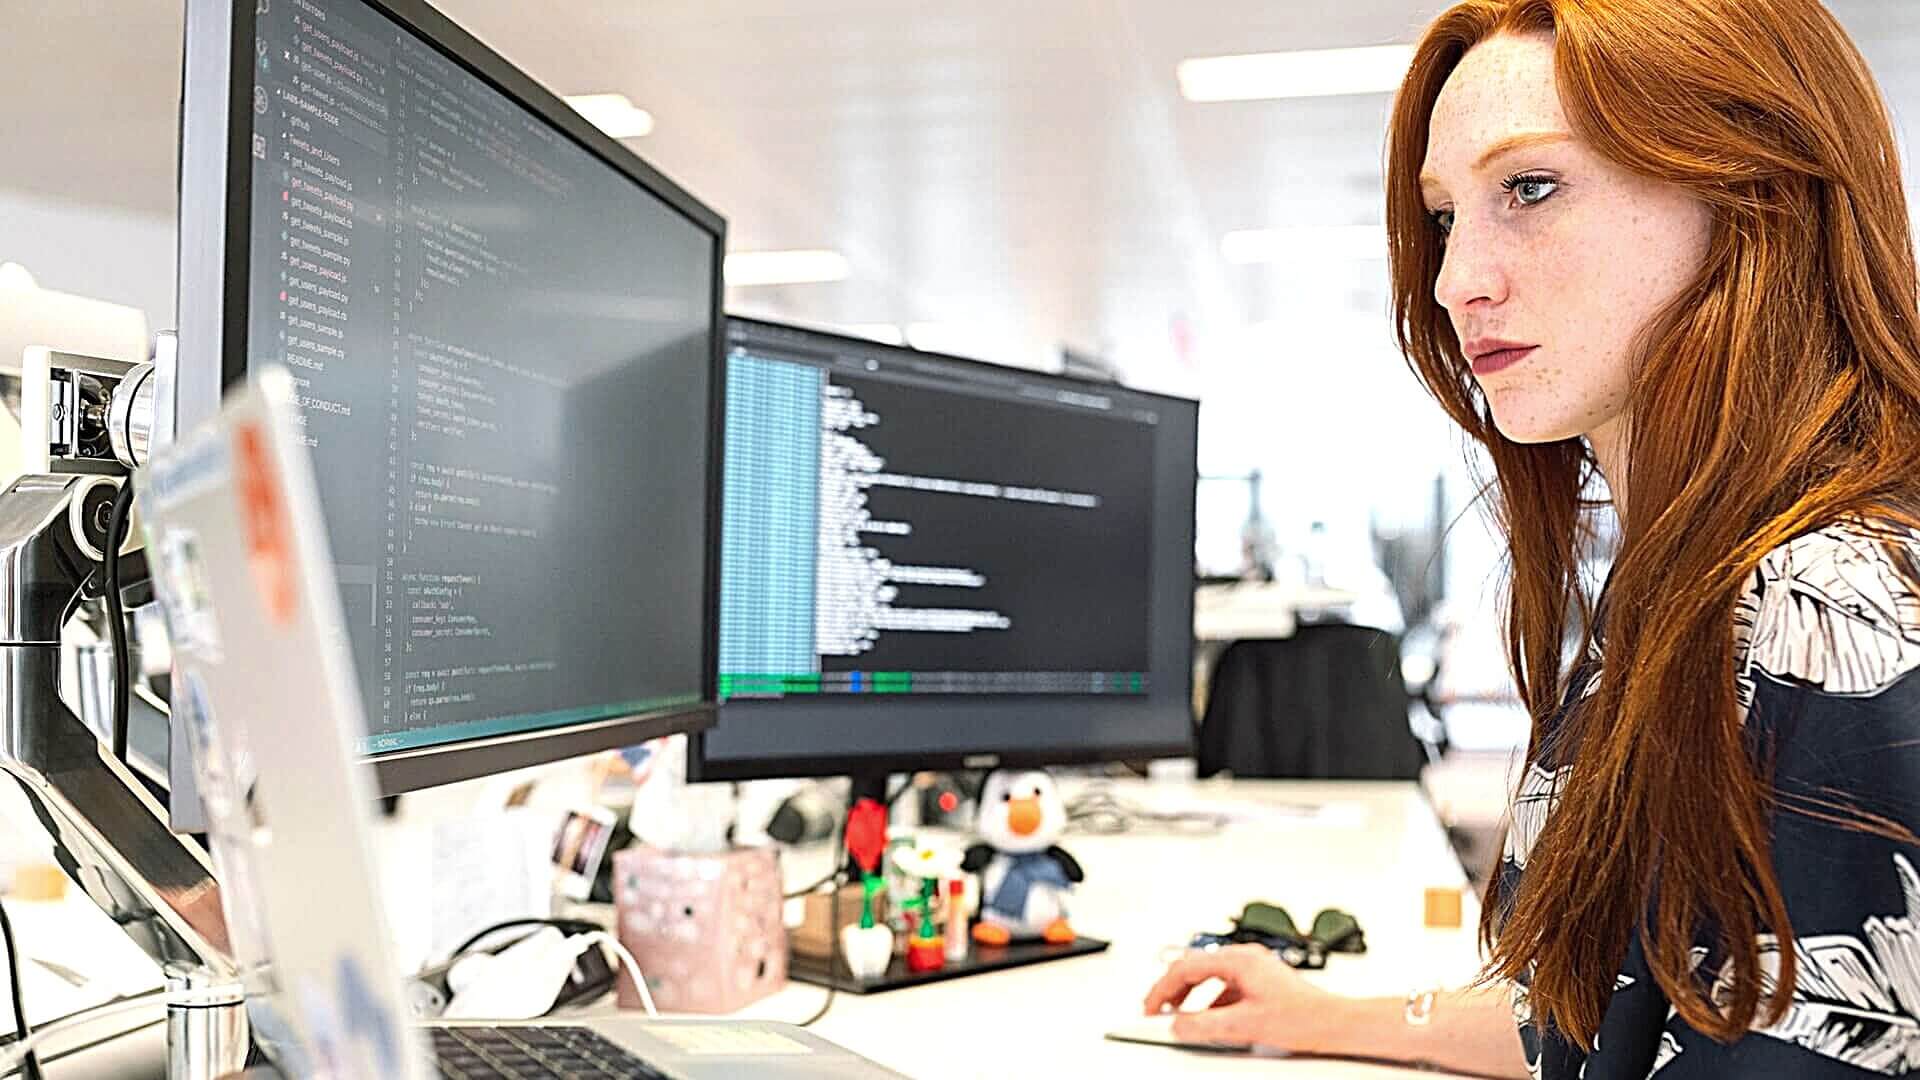 Side profile of a woman with red hair working at a desk with three large screens.